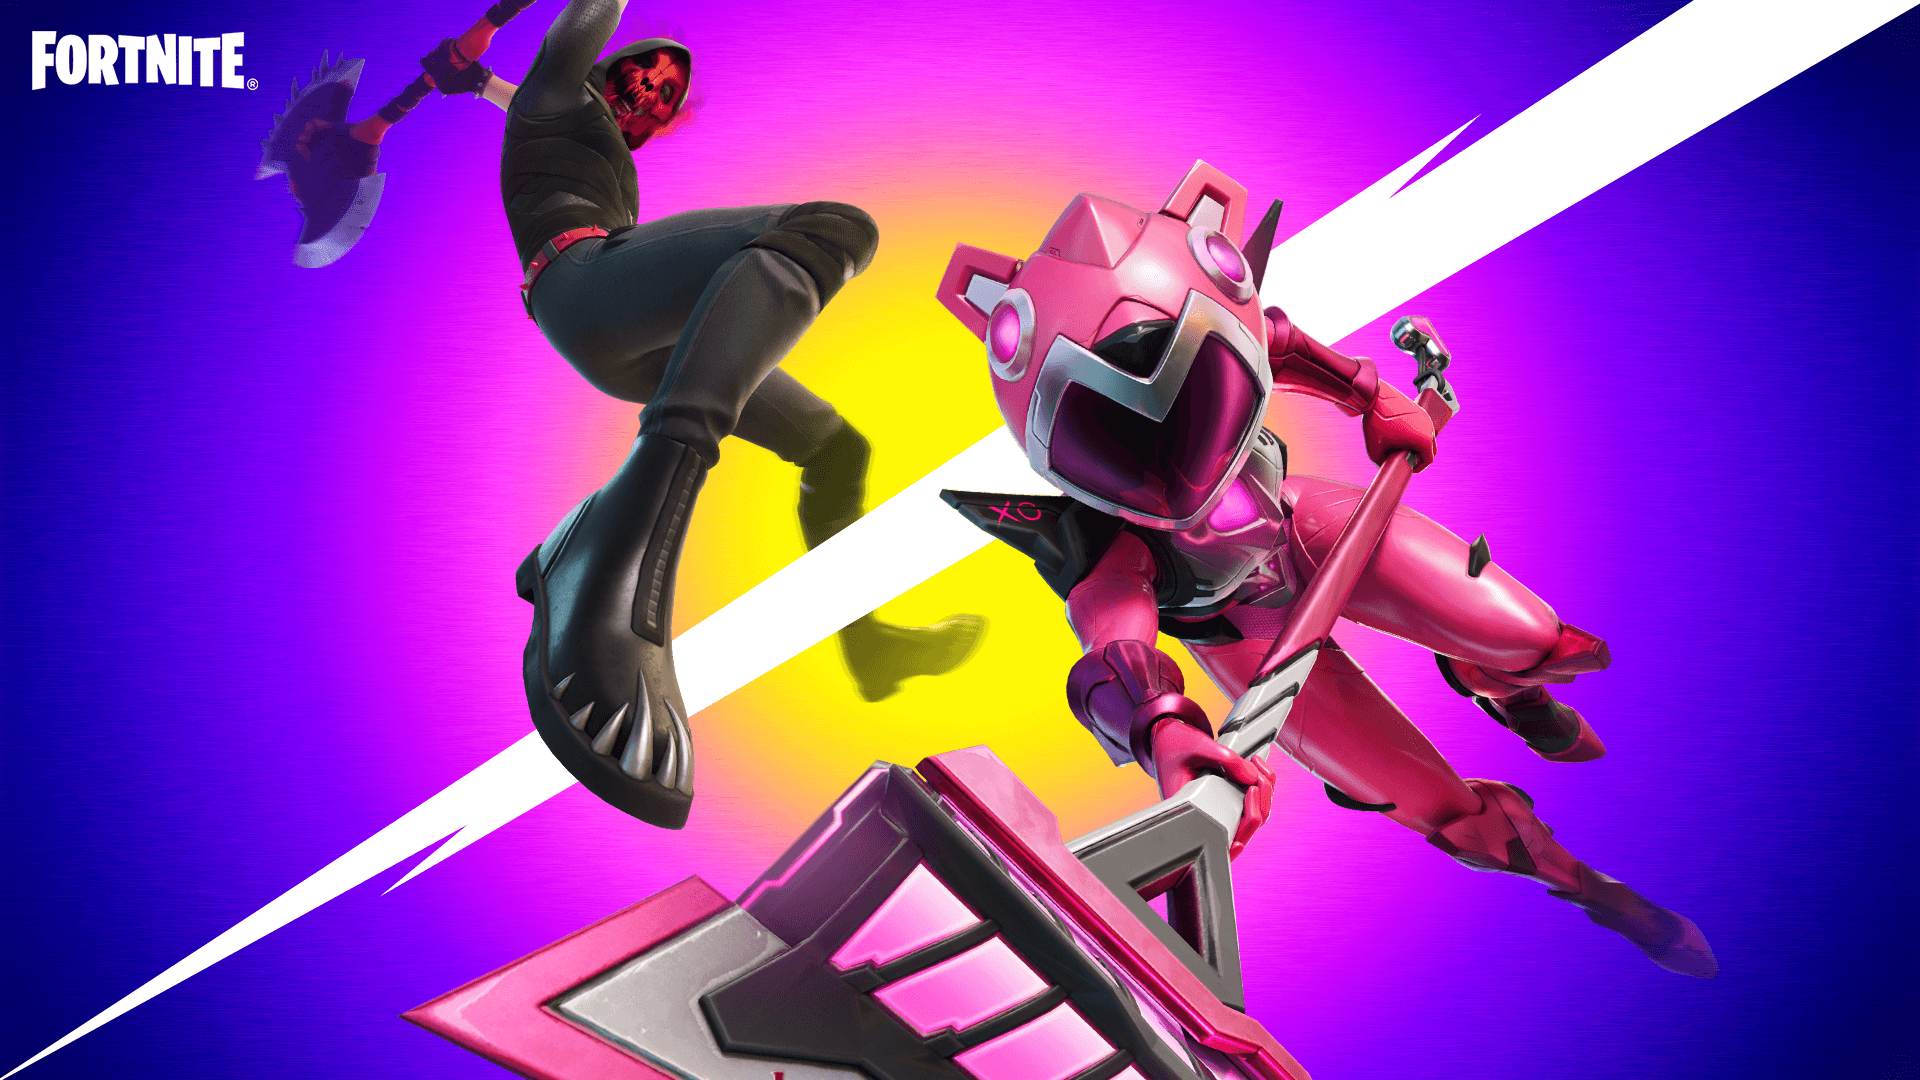 Fortnite 17.30 update patch notes: Slurpy Swamp abduction, new NPCs and the Grab-itron  